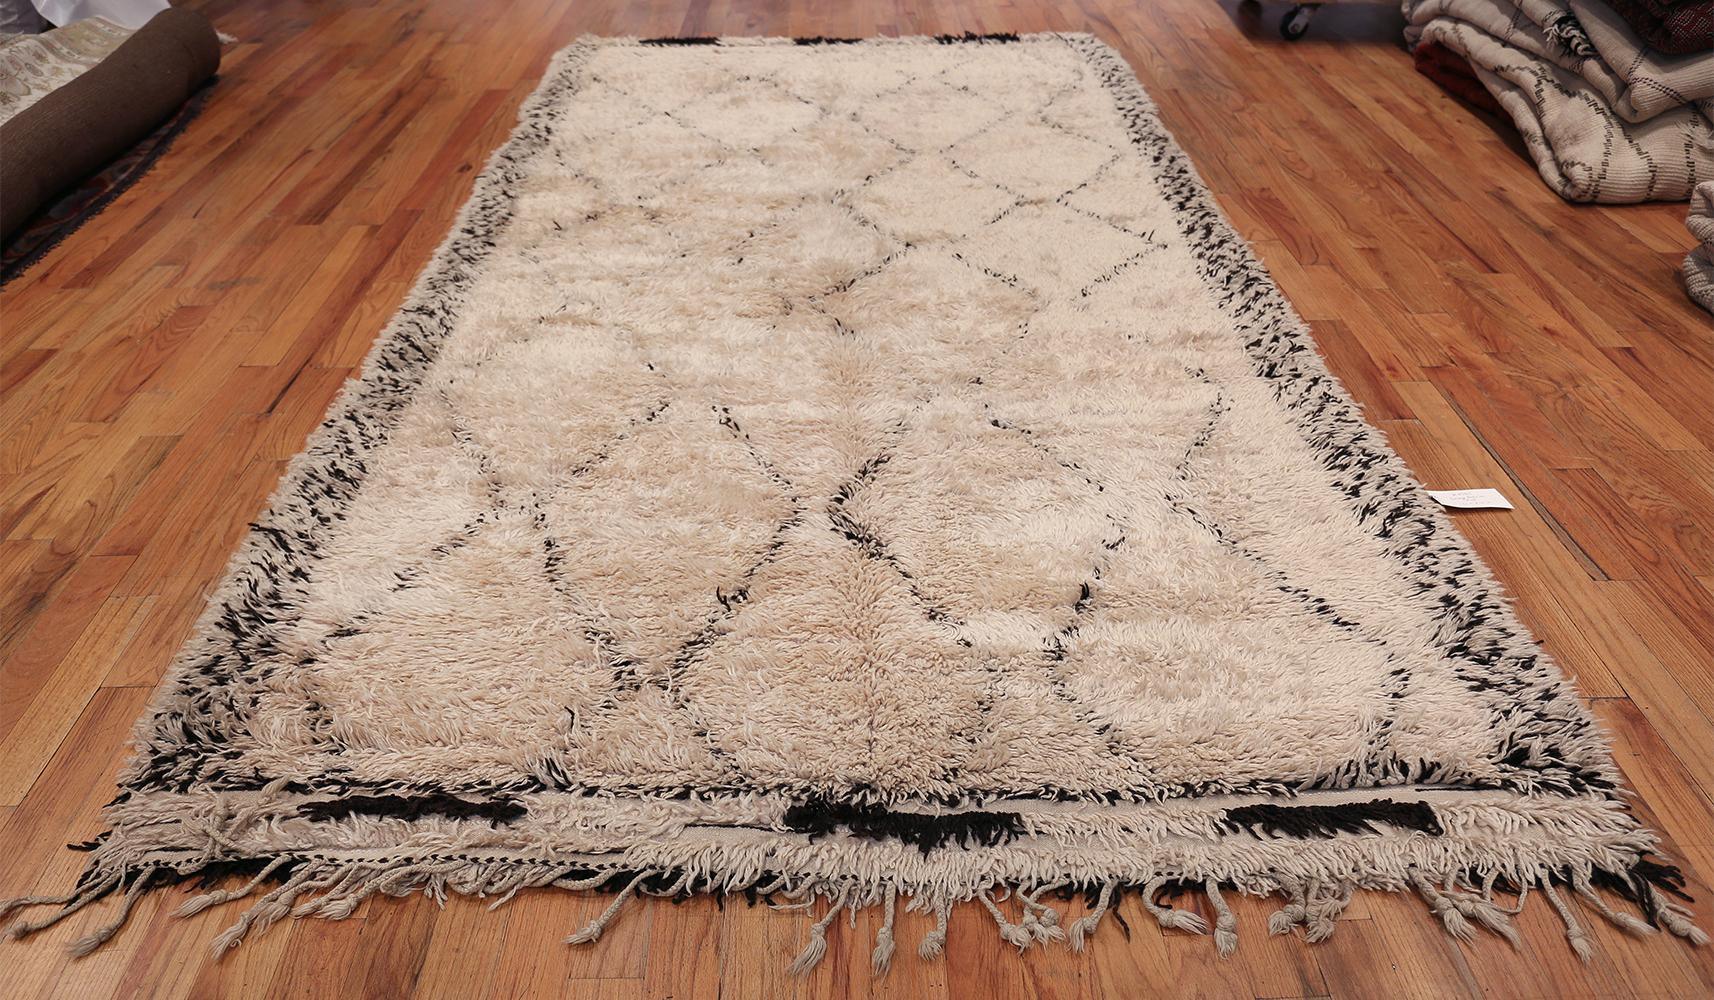 Breathtaking Diamond Geometric Vintage Ivory Shag Moroccan Beni Ourain Rug, Country of Origin / Rug Type: Morocco, Circa Date: Mid – 20th Century. Size: 6 ft 3 in x 12 ft 2 in (1.9 m x 3.71 m)

Moroccan Beni Ourain rugs hold a special place in